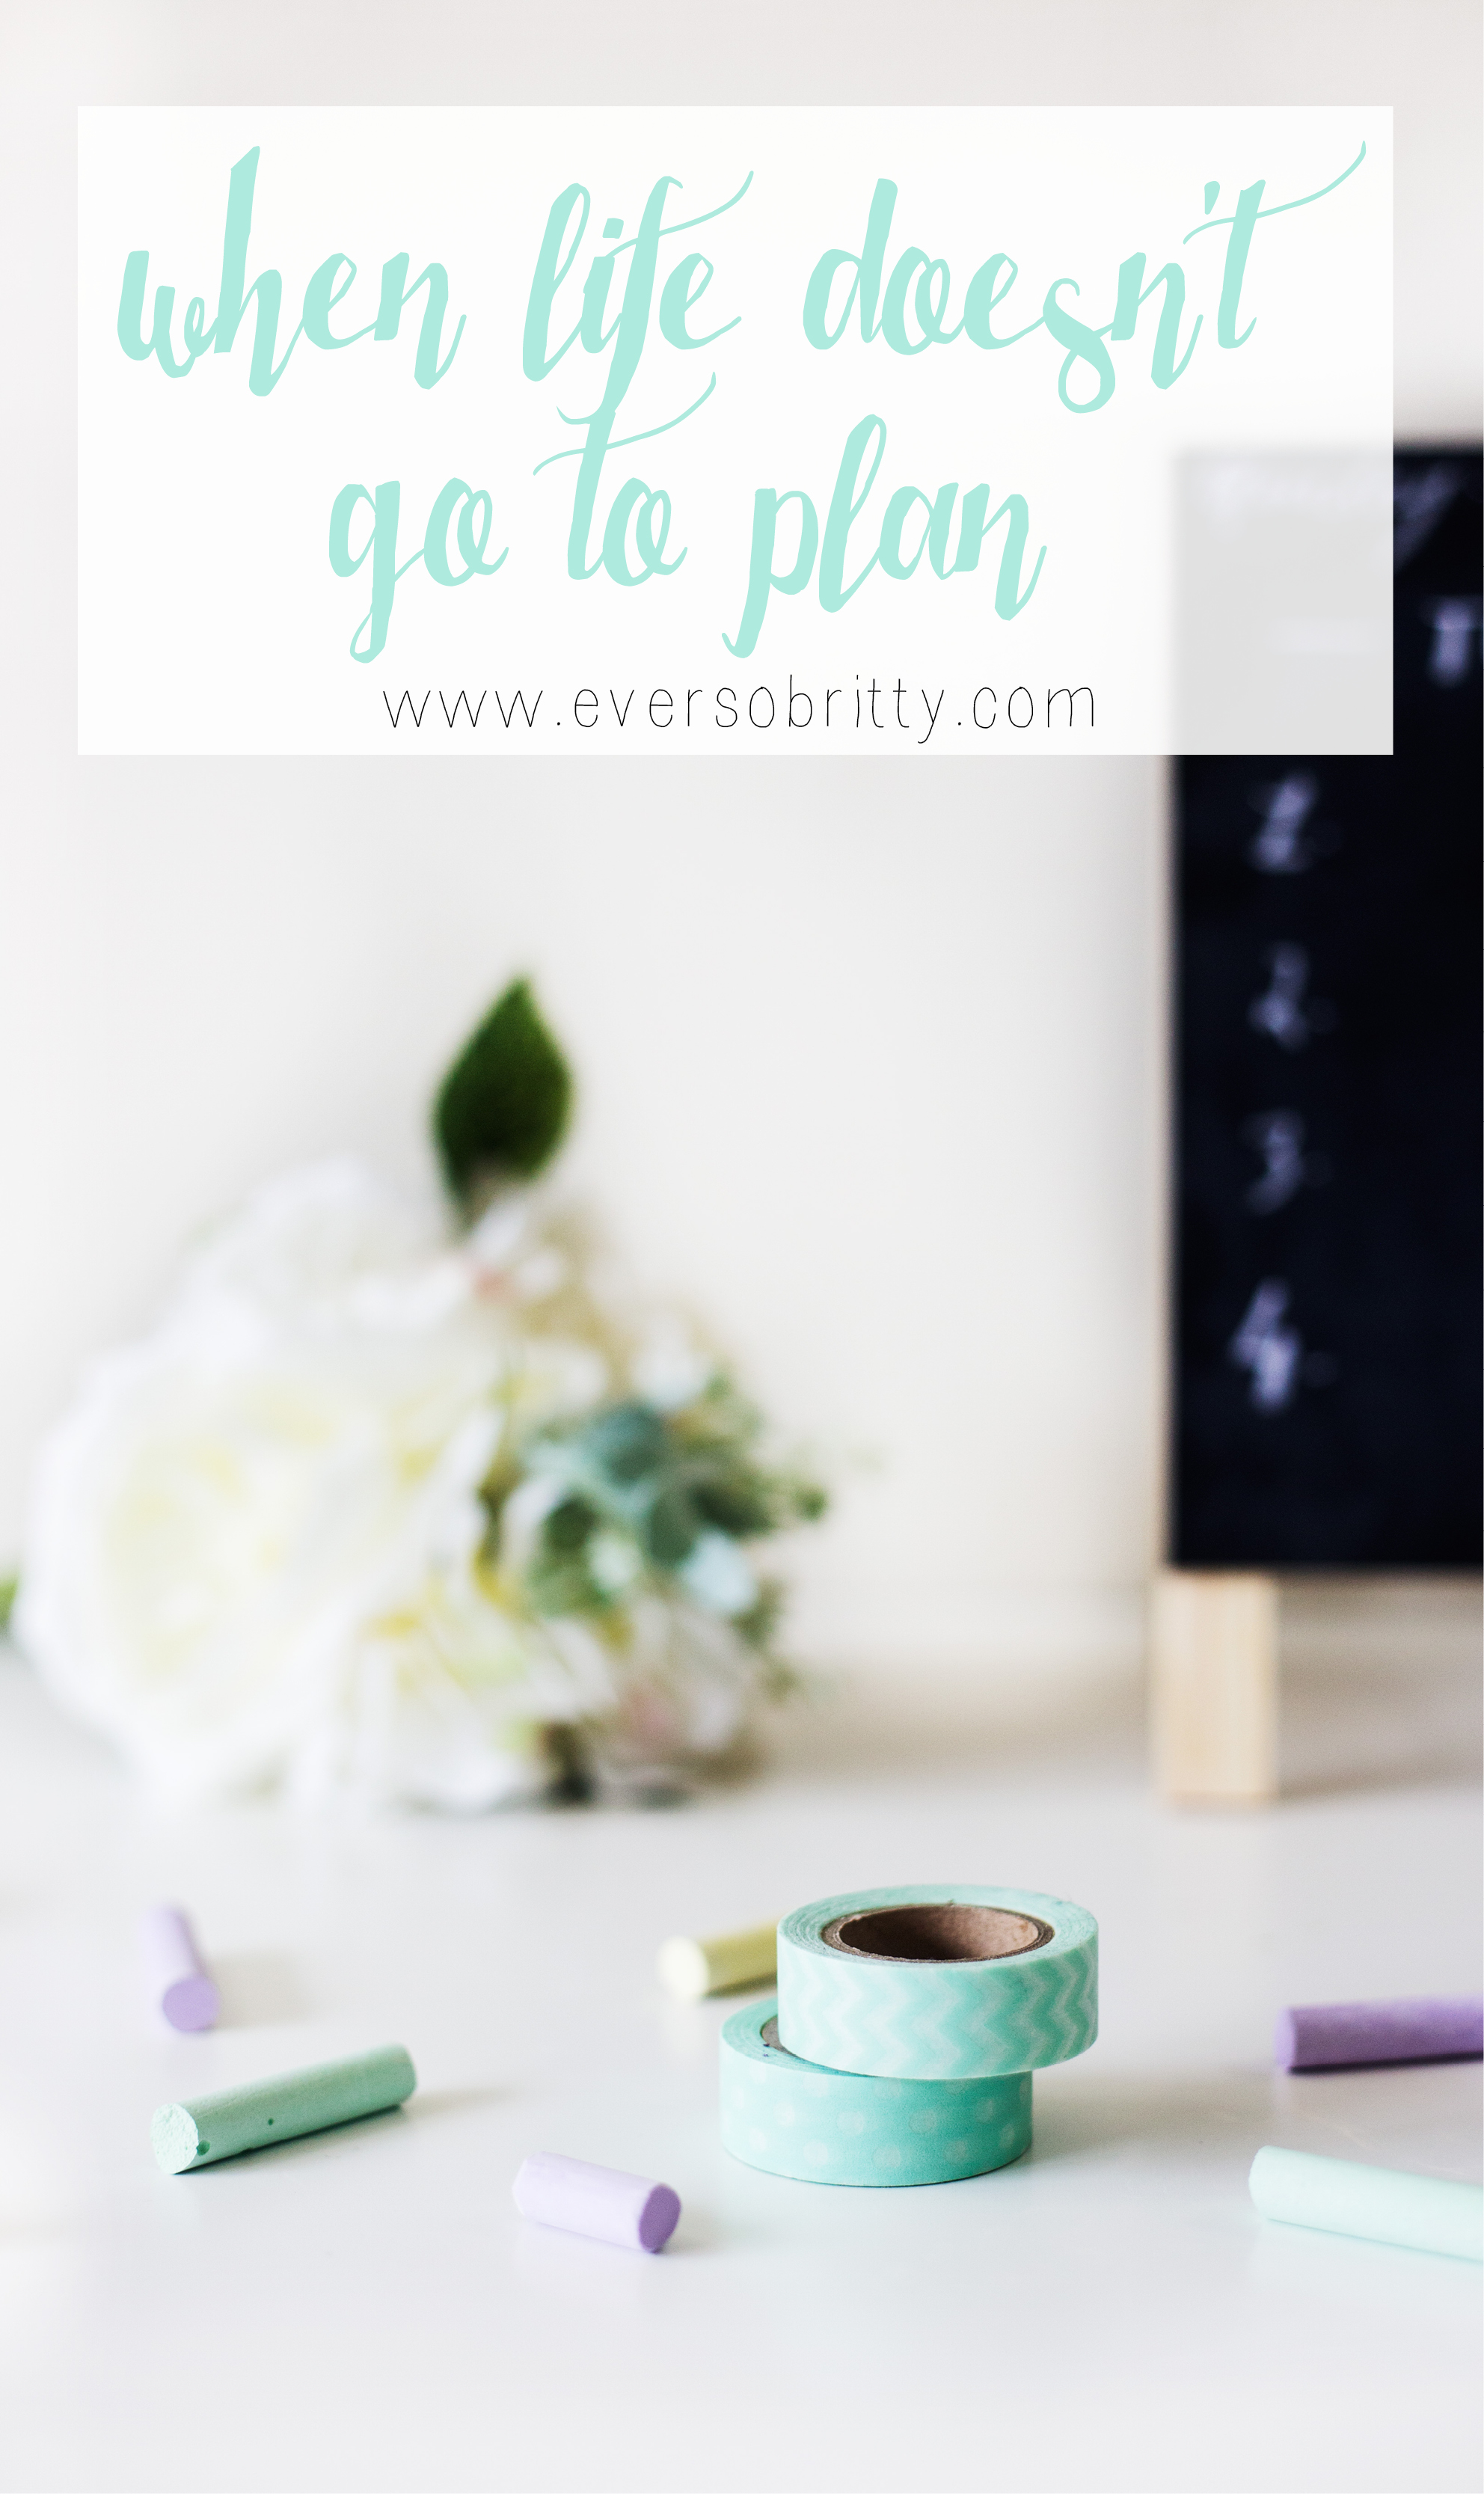 When Life Doesn't Go to Plan - Finding God's plan and purpose among the chaos and confusion. Find more real life stories at EverSoBritty.com